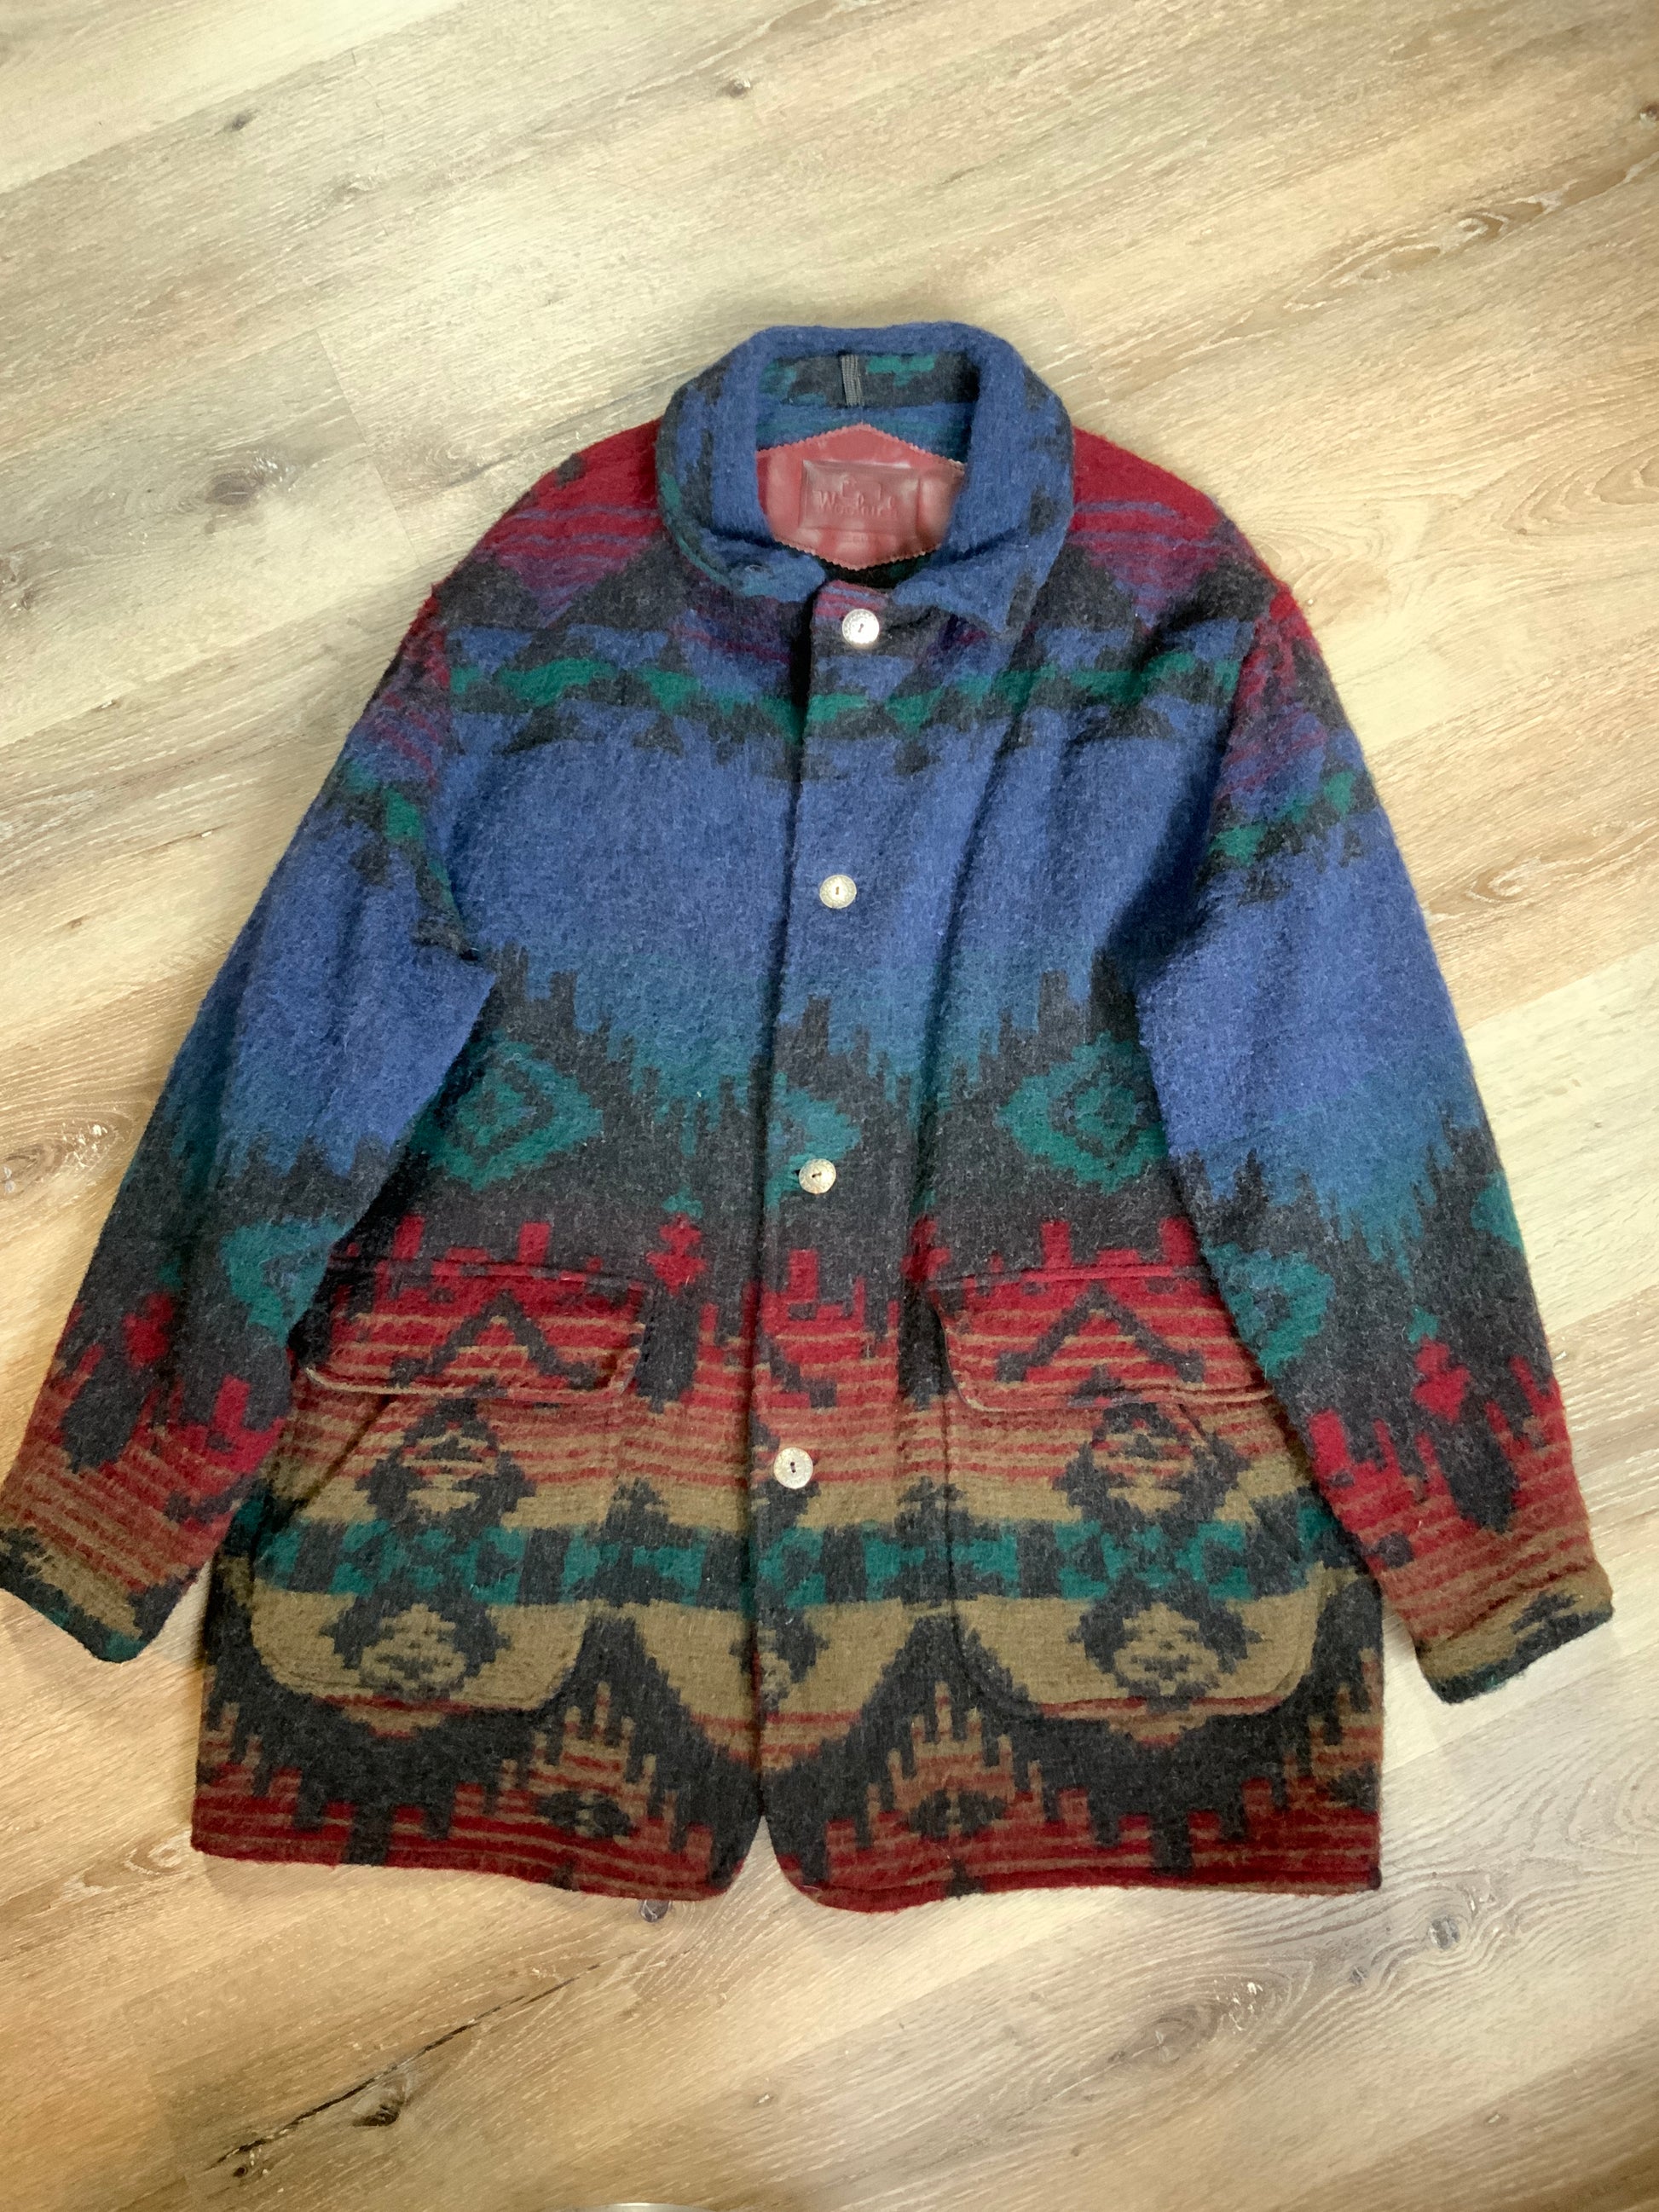 Kingspier Vintage - Woolrich blue, green, red design wool coat with silver buttons, flap pockets. Made in the USA. Size XL. 